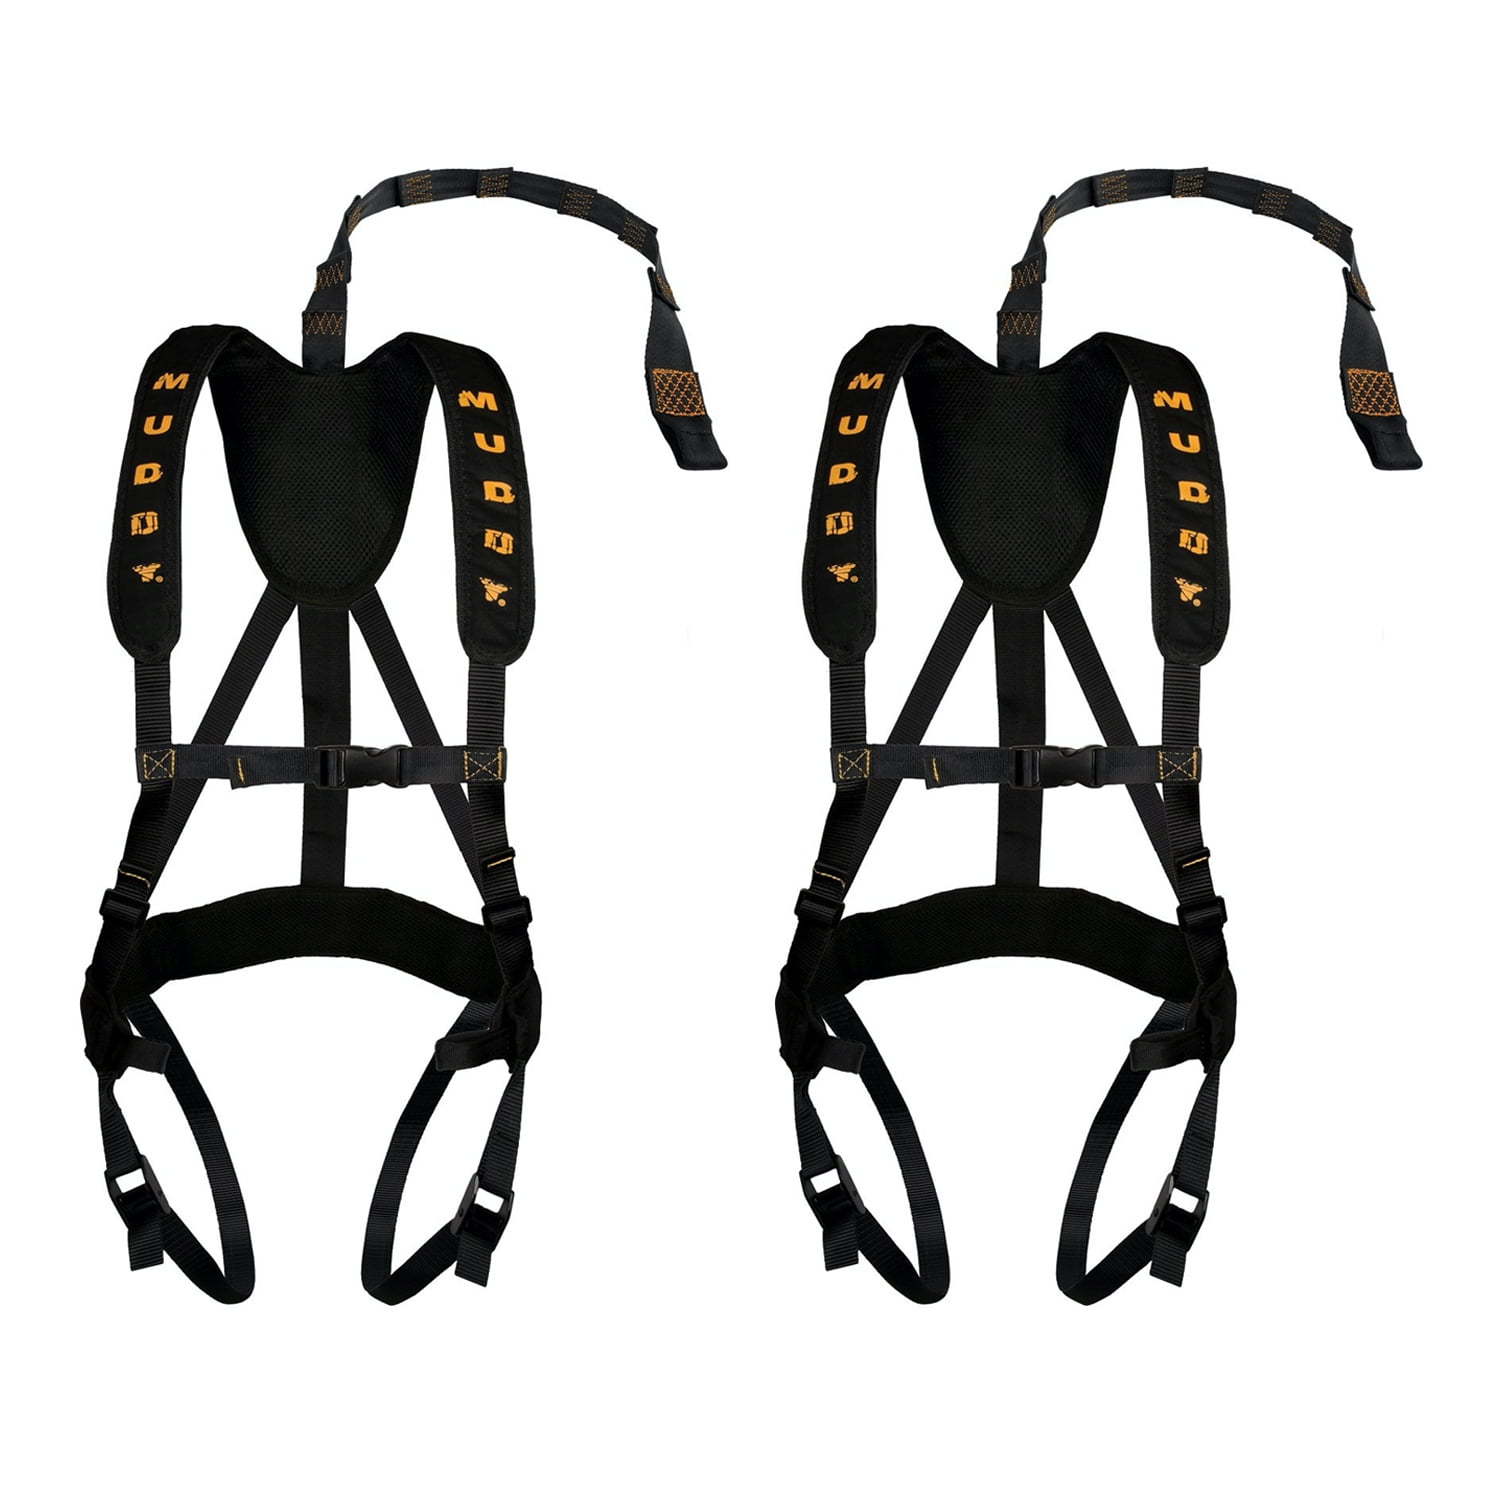 2 Pack Details about   Muddy Outdoors Magnum Pro Padded Adjustable Treestand Harness System 